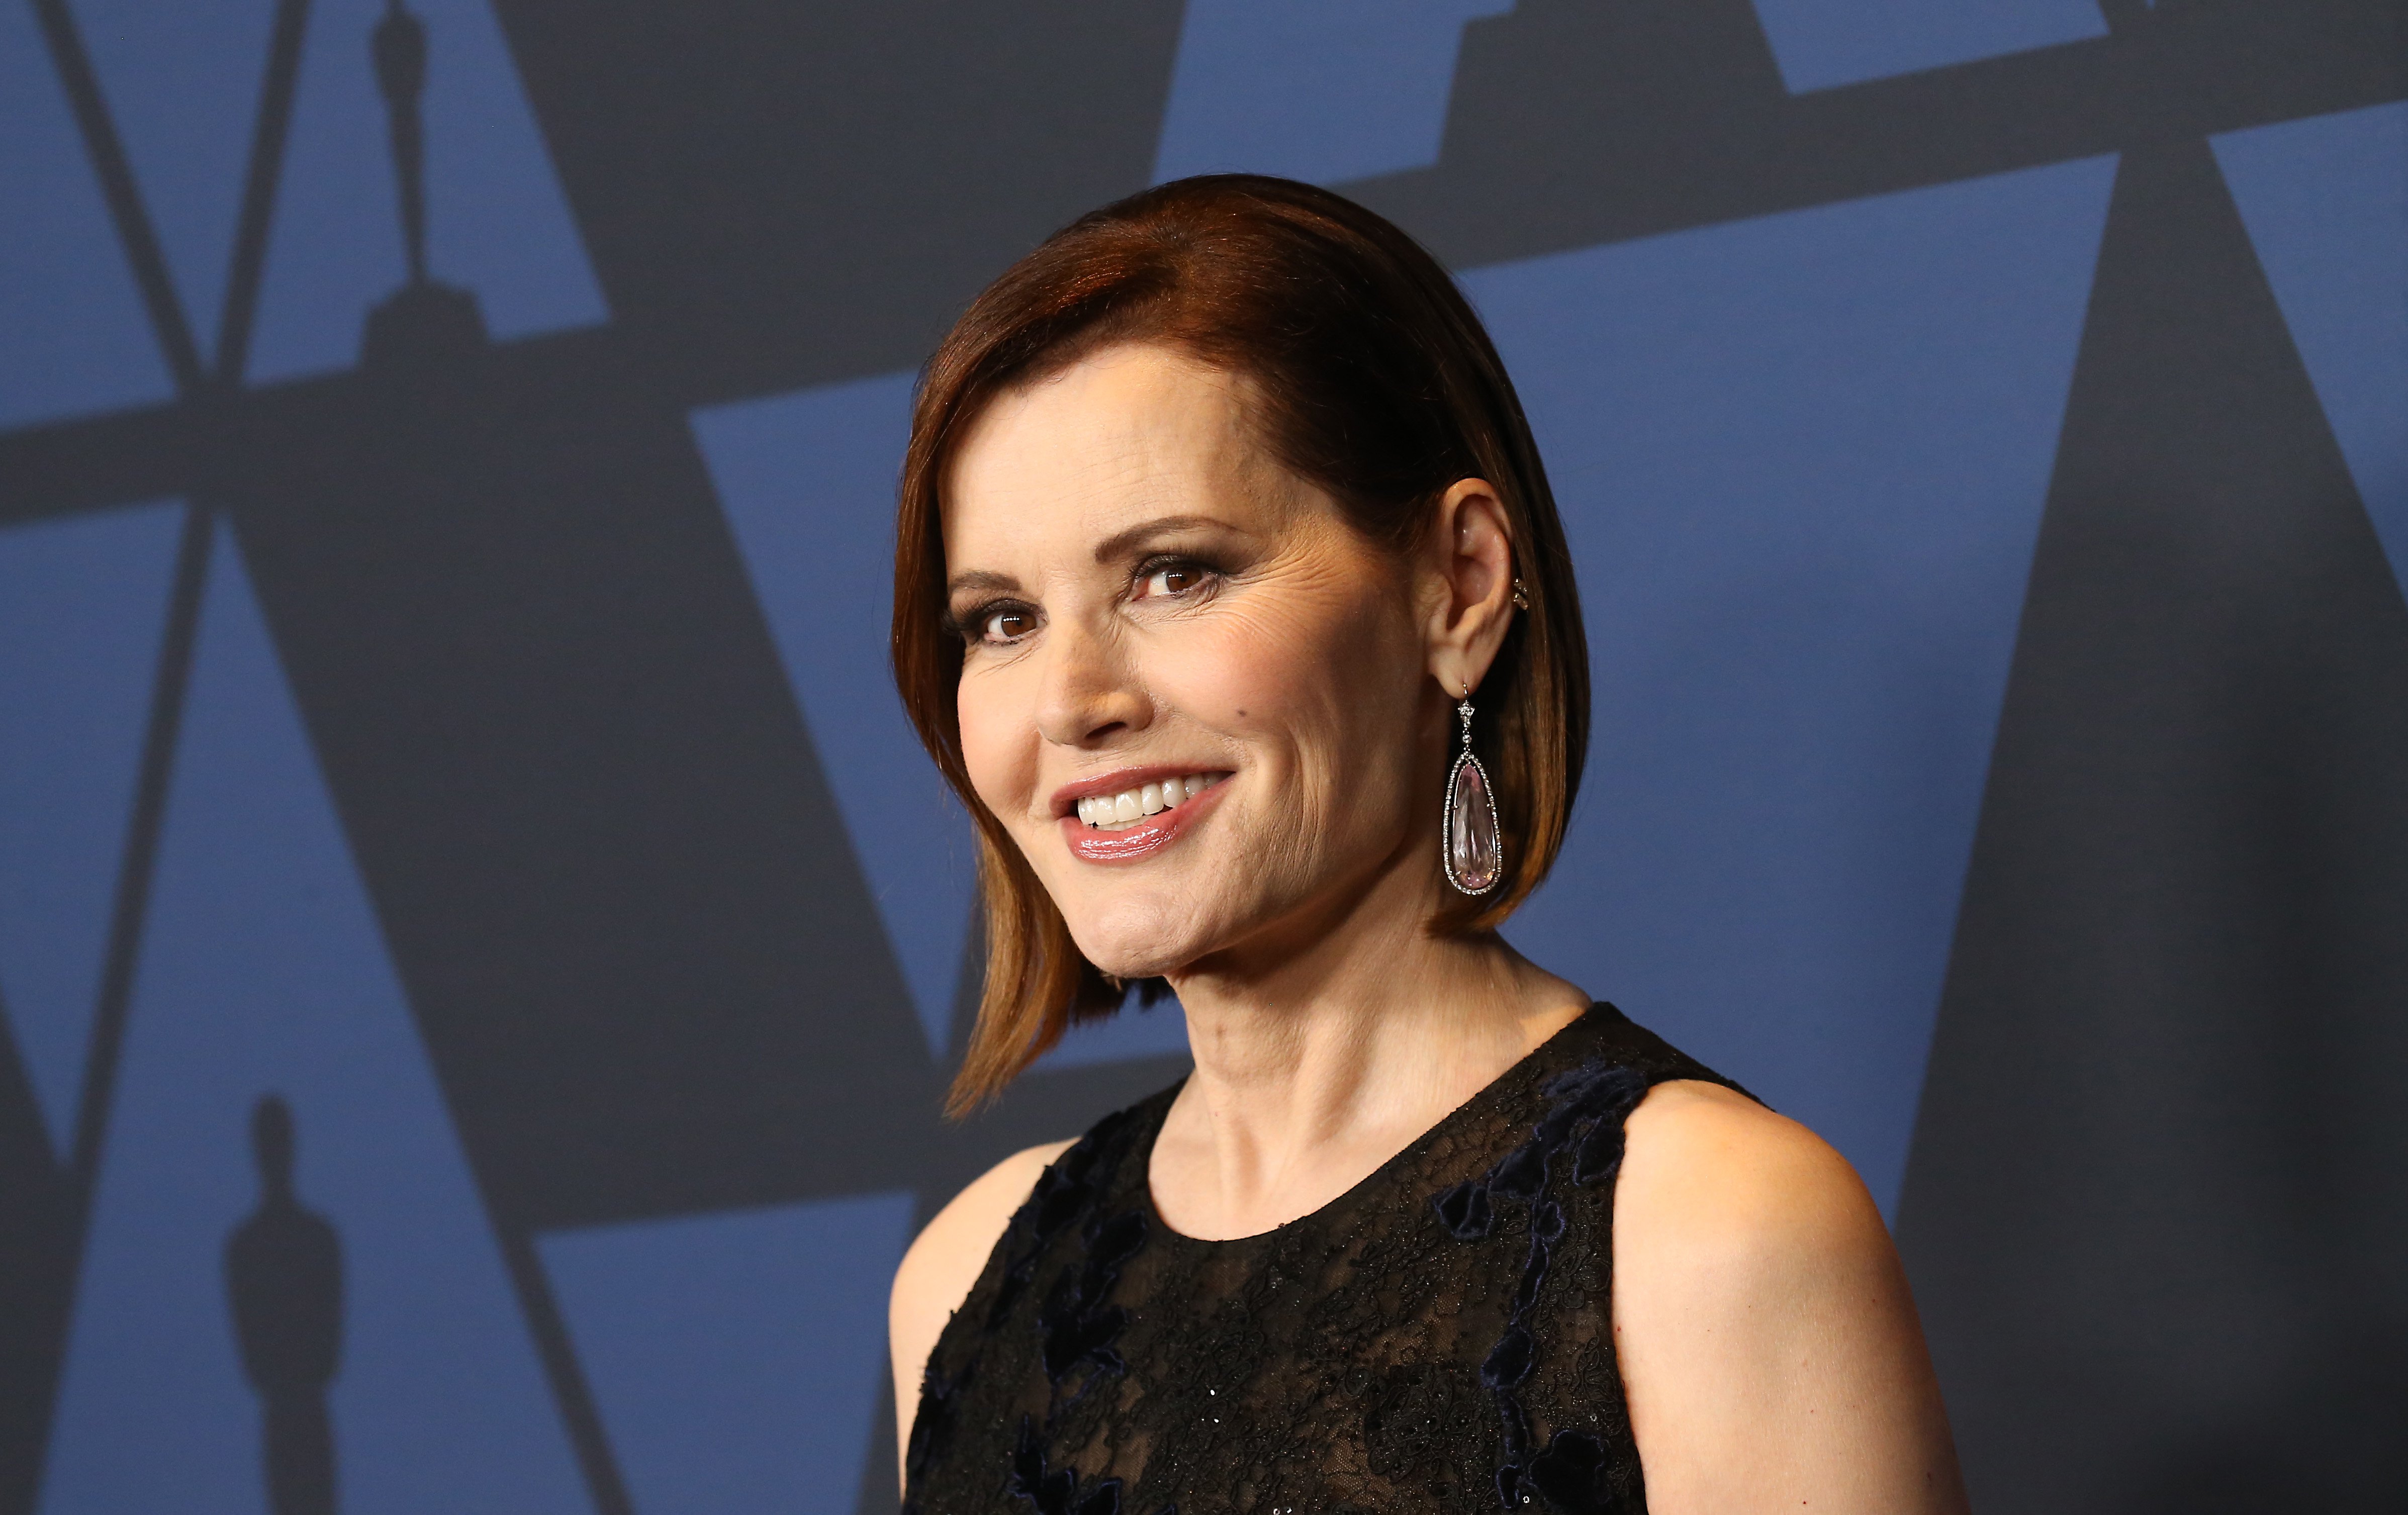 Geena Davis at the Academy of Motion Picture Arts and Sciences' 11th Annual Governors Awards on October 27, 2019 | Source: Getty Images